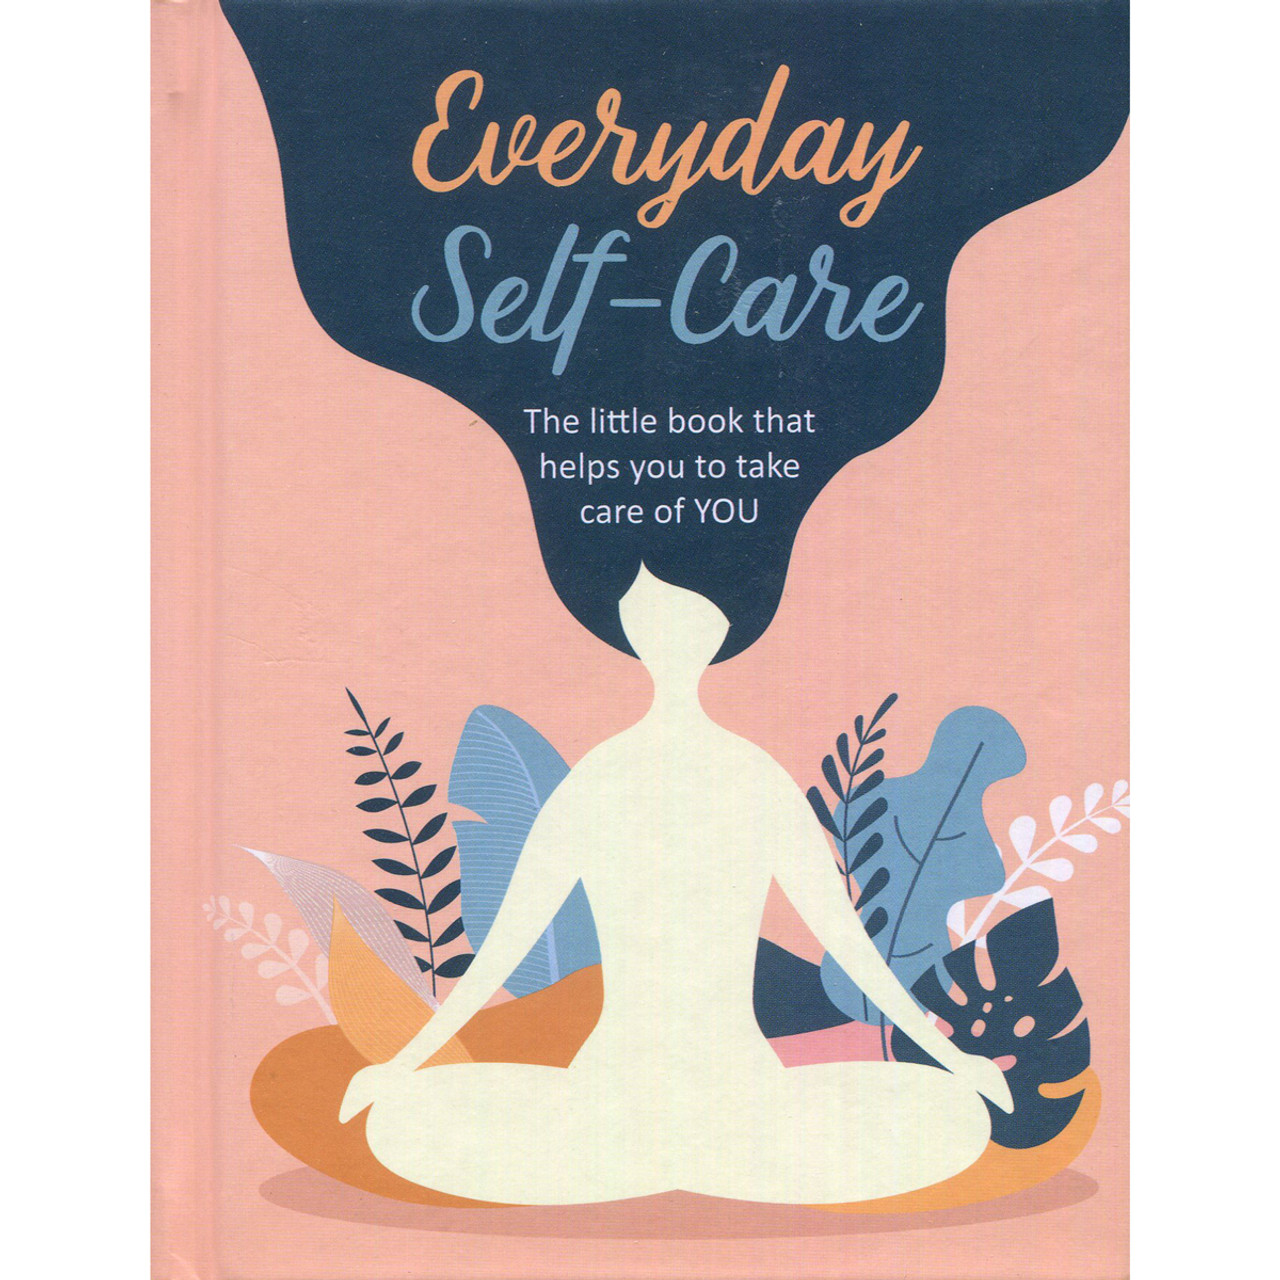 Everyday Self-Care: The little book that helps you to take care of YOU.